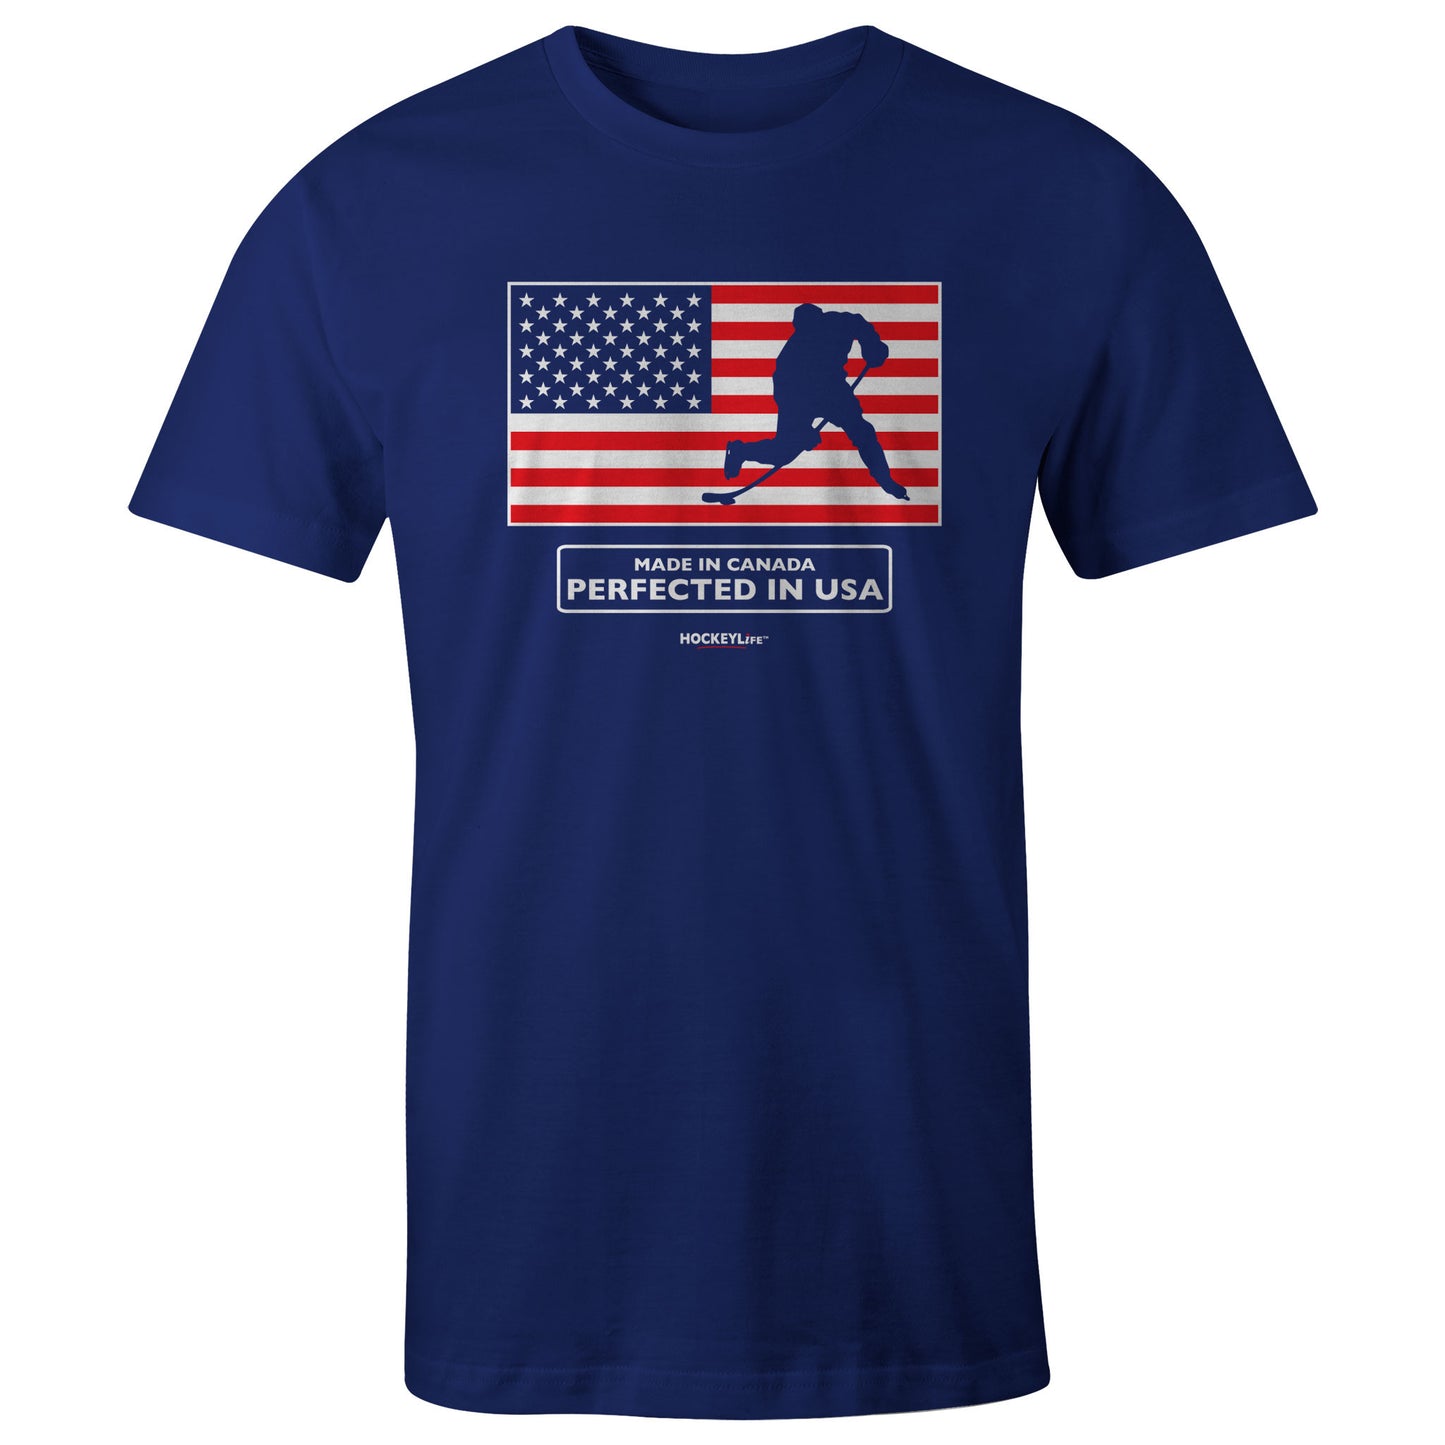 Made in Canada Perfected in USA Tee Shirt (Navy)